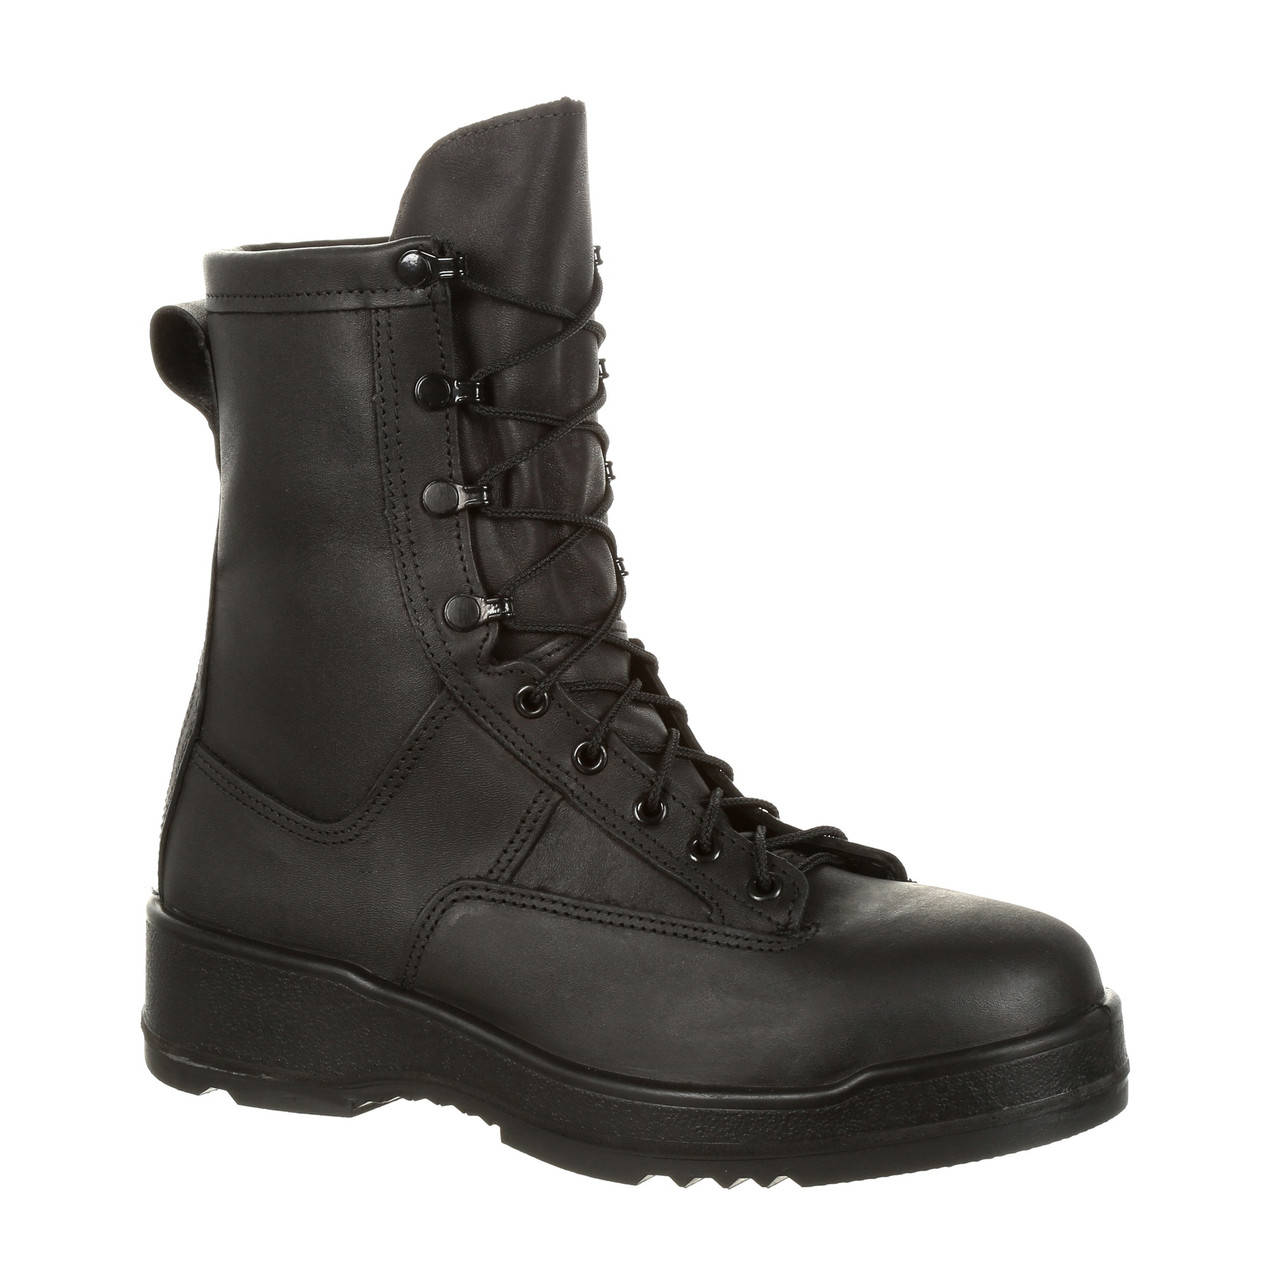 ROCKY ENTRY LEVEL HOT WEATHER STEEL TOE MILITARY BOOTS RKC058